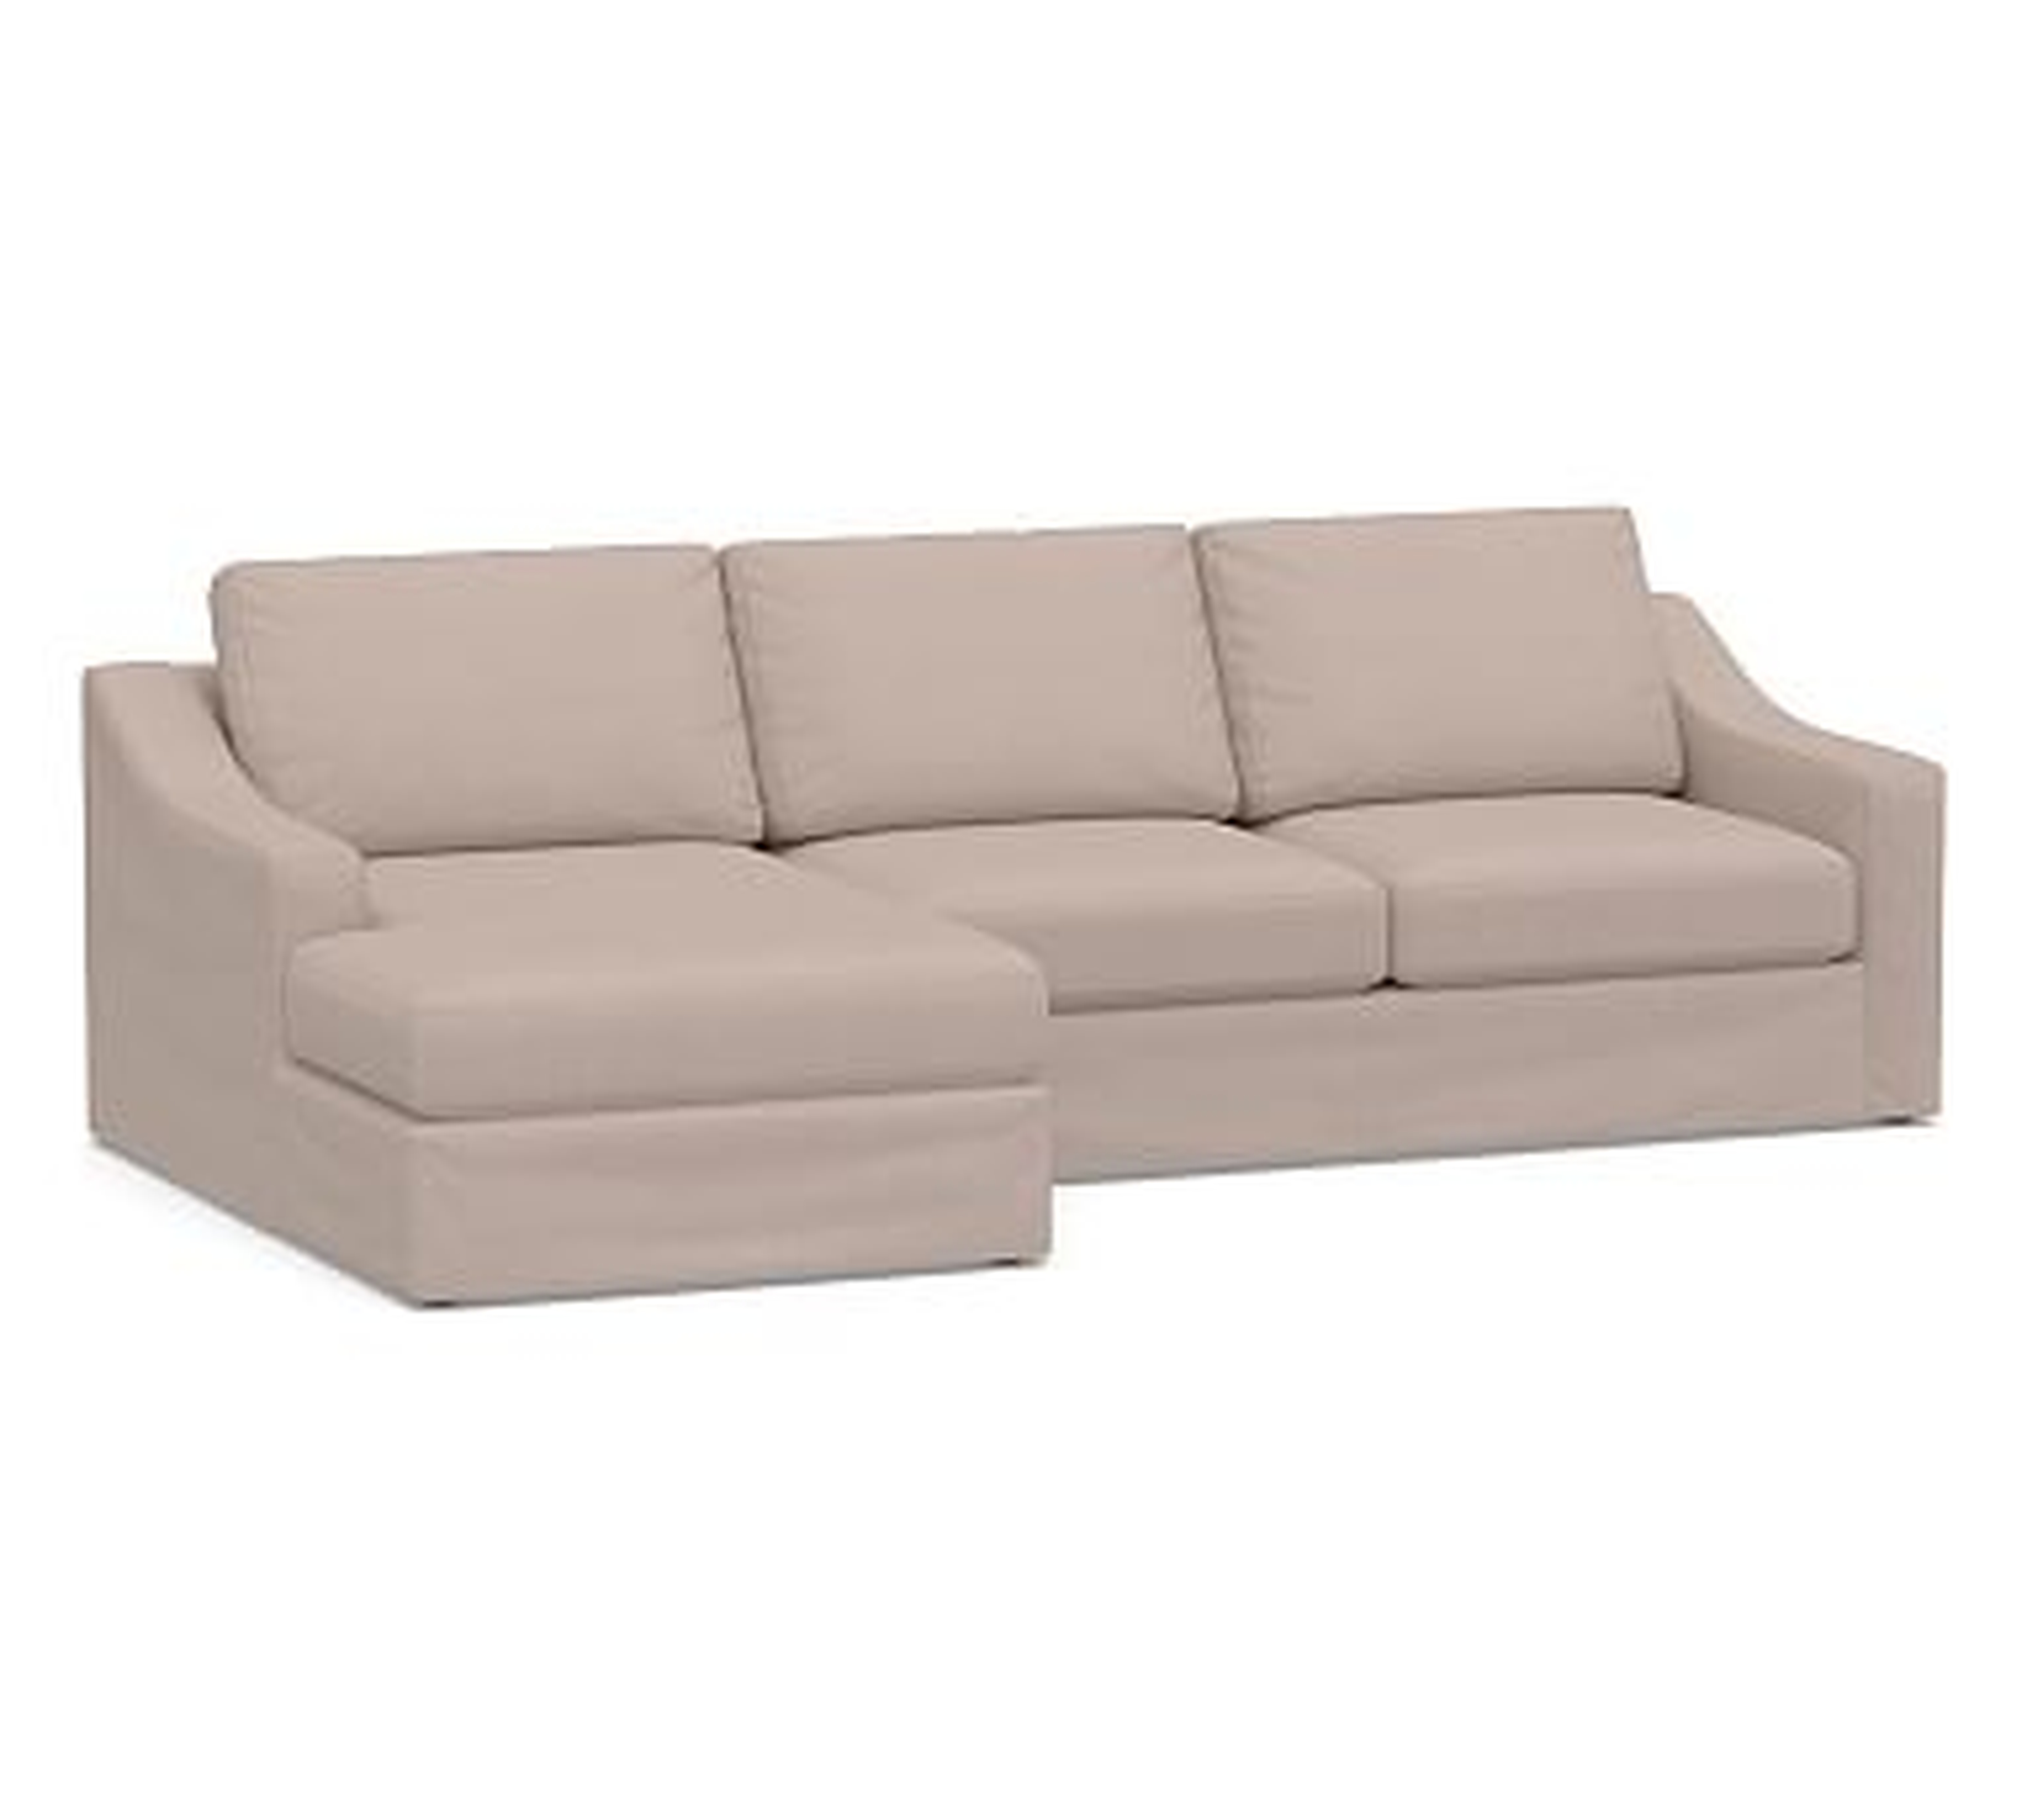 Big Sur Slope Arm Slipcovered Right Arm Loveseat with Chaise Sectional, Down Blend Wrapped Cushions, Performance Heathered Tweed Desert - Pottery Barn